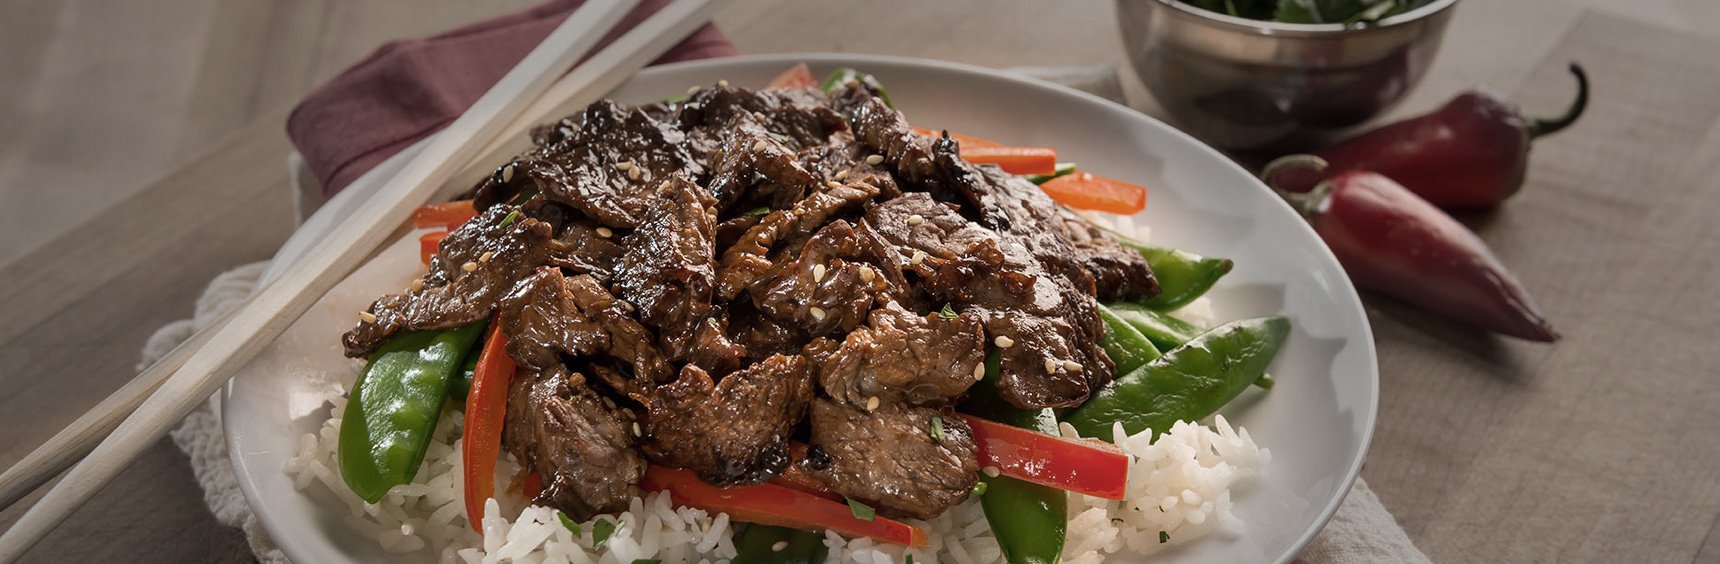 Beef stir fry on plate with chop sticks